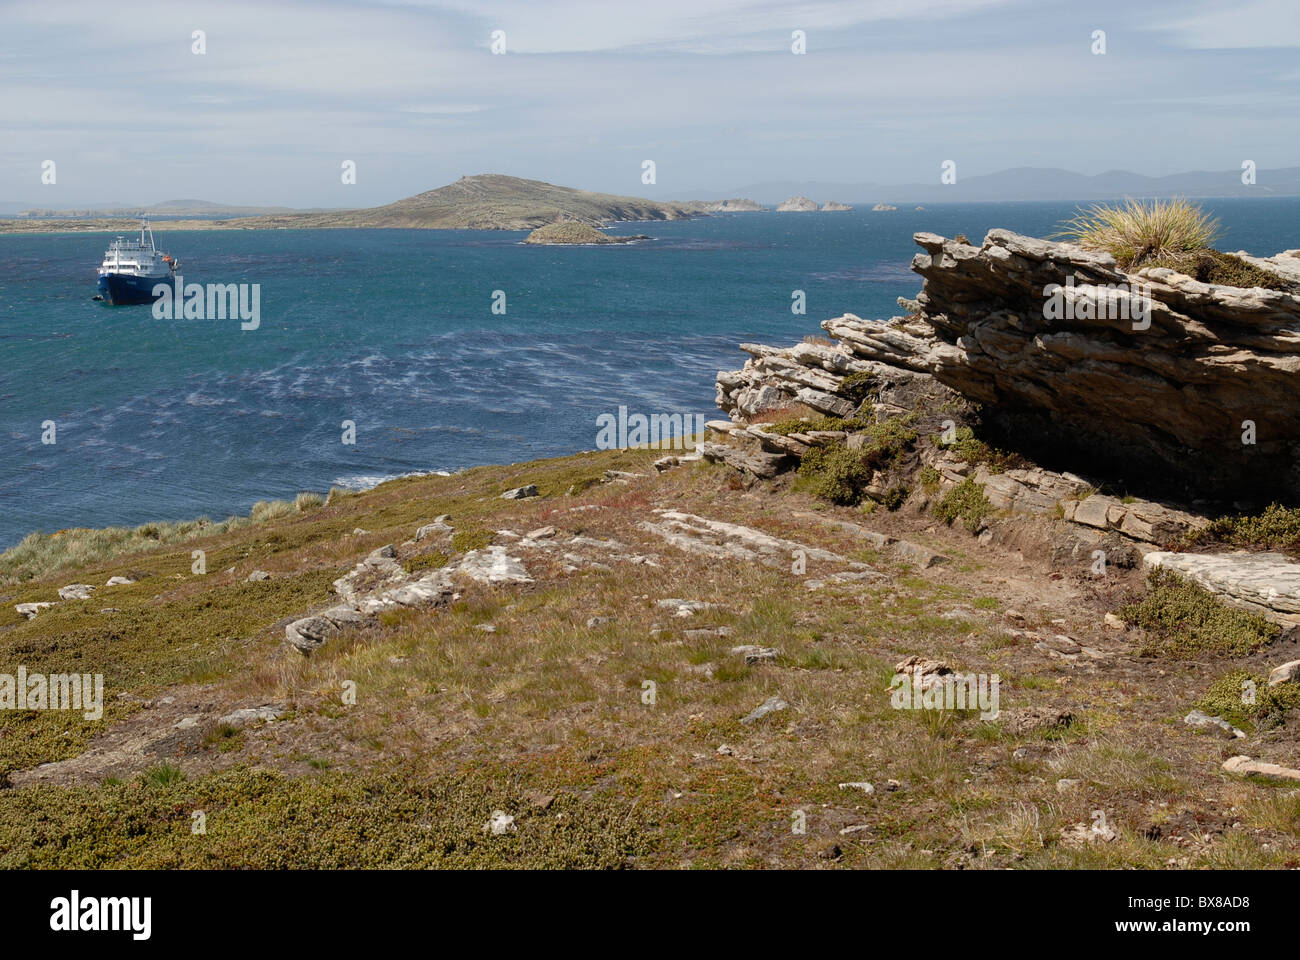 Rocks at Port Pattison, Carcass Island, and the expedition vessel m/v Plancius on anchor in the bay Stock Photo